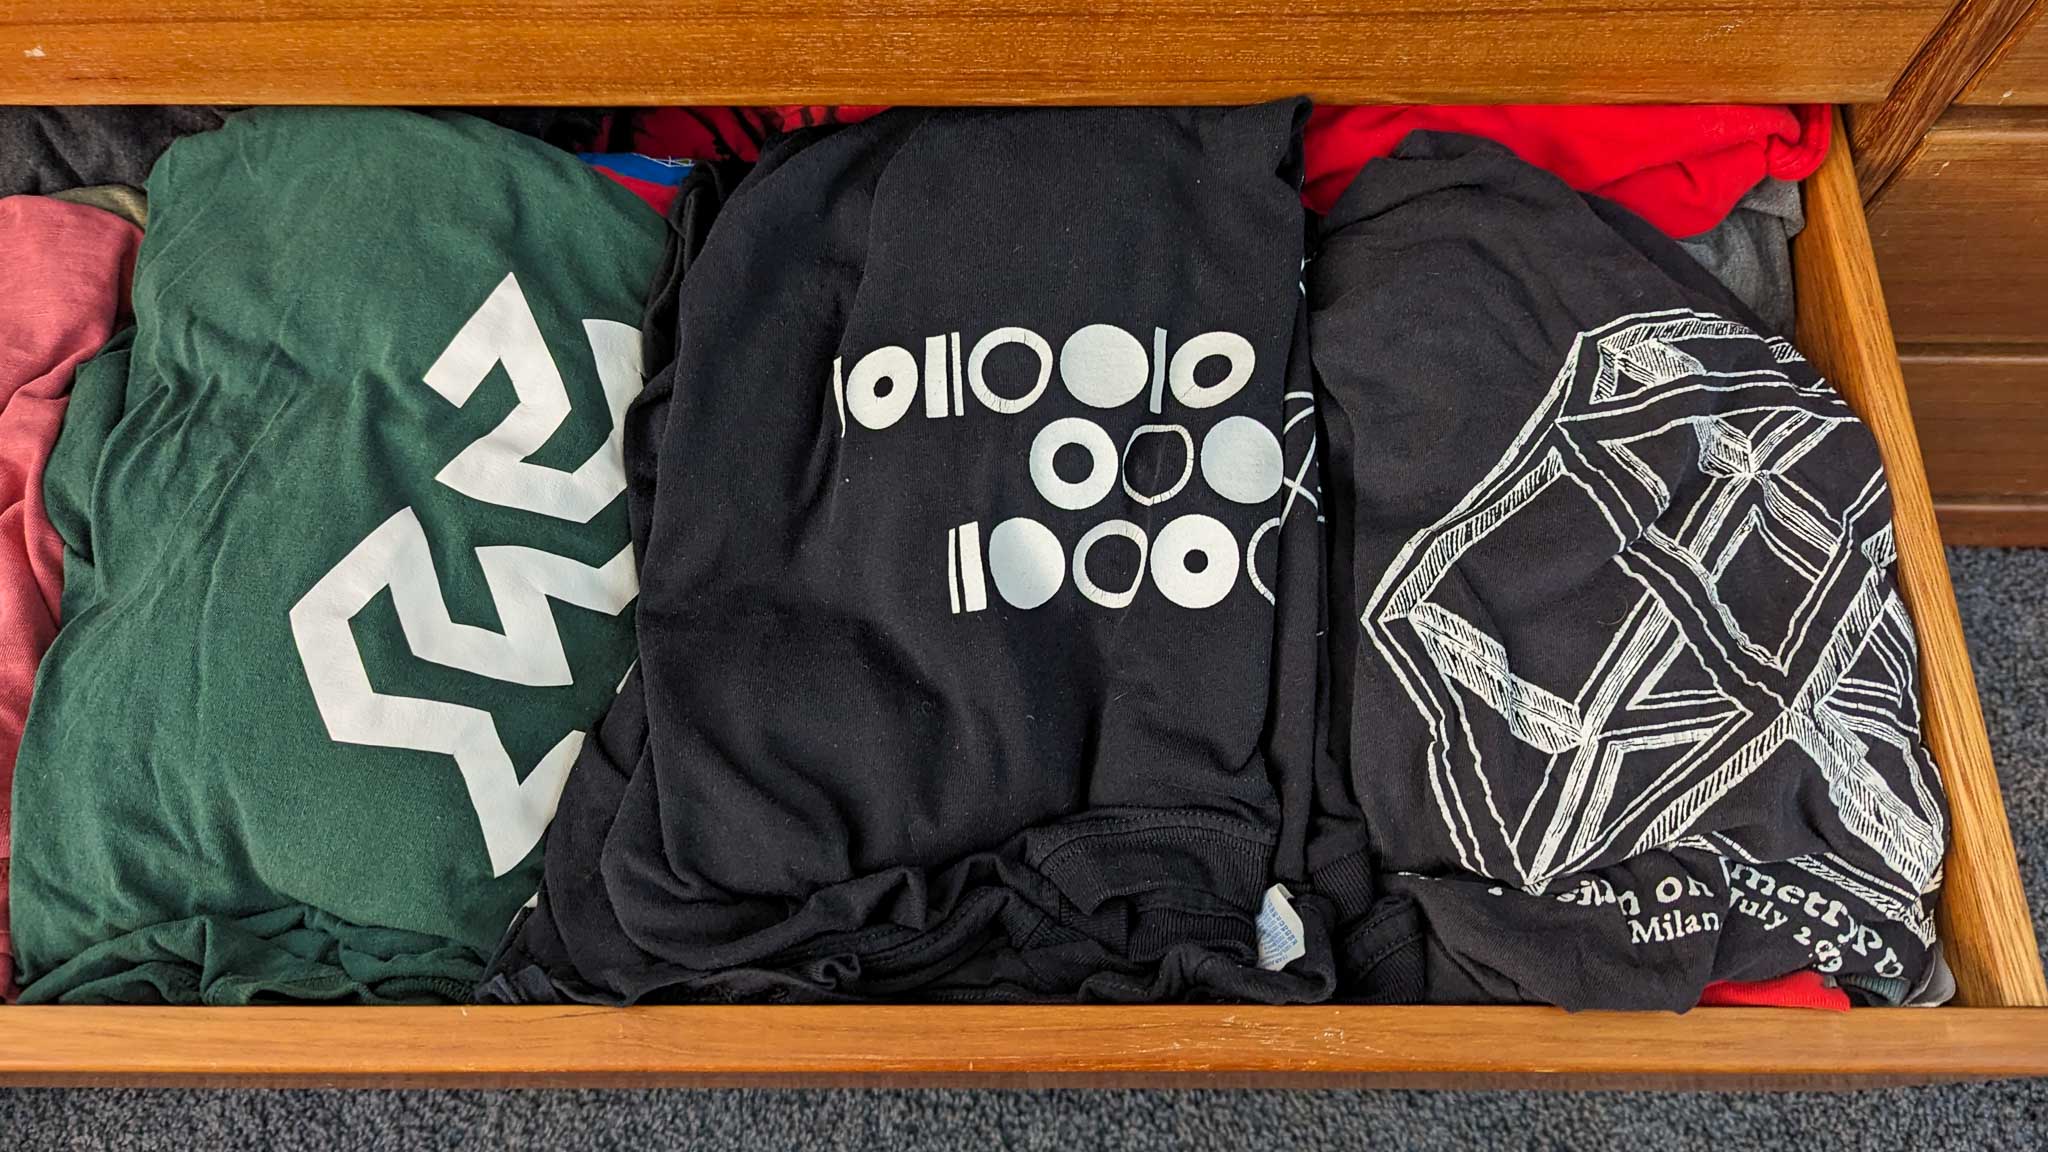 T-shirts in an open dresser drawer, including a Computer History Museum shirt showing the binary ASCII code for "chm"